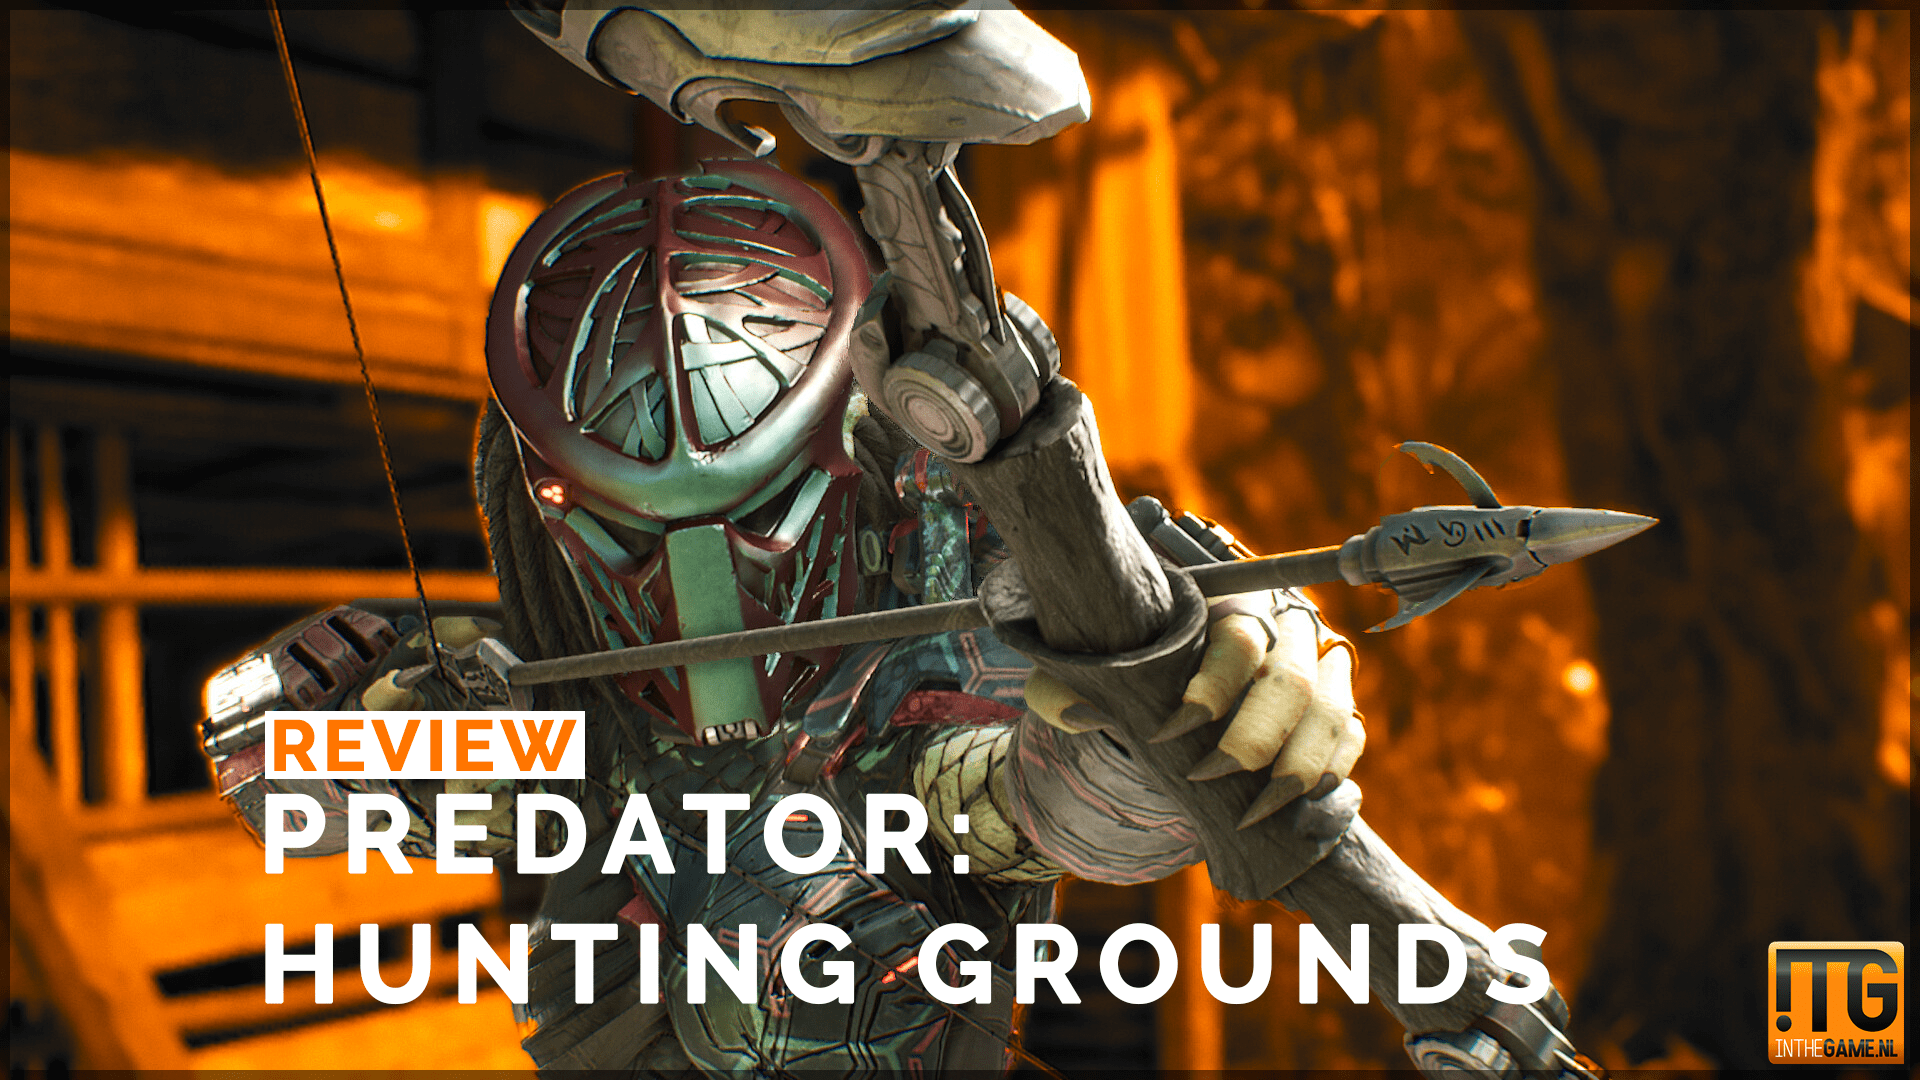 Review: Predator Hunting Grounds